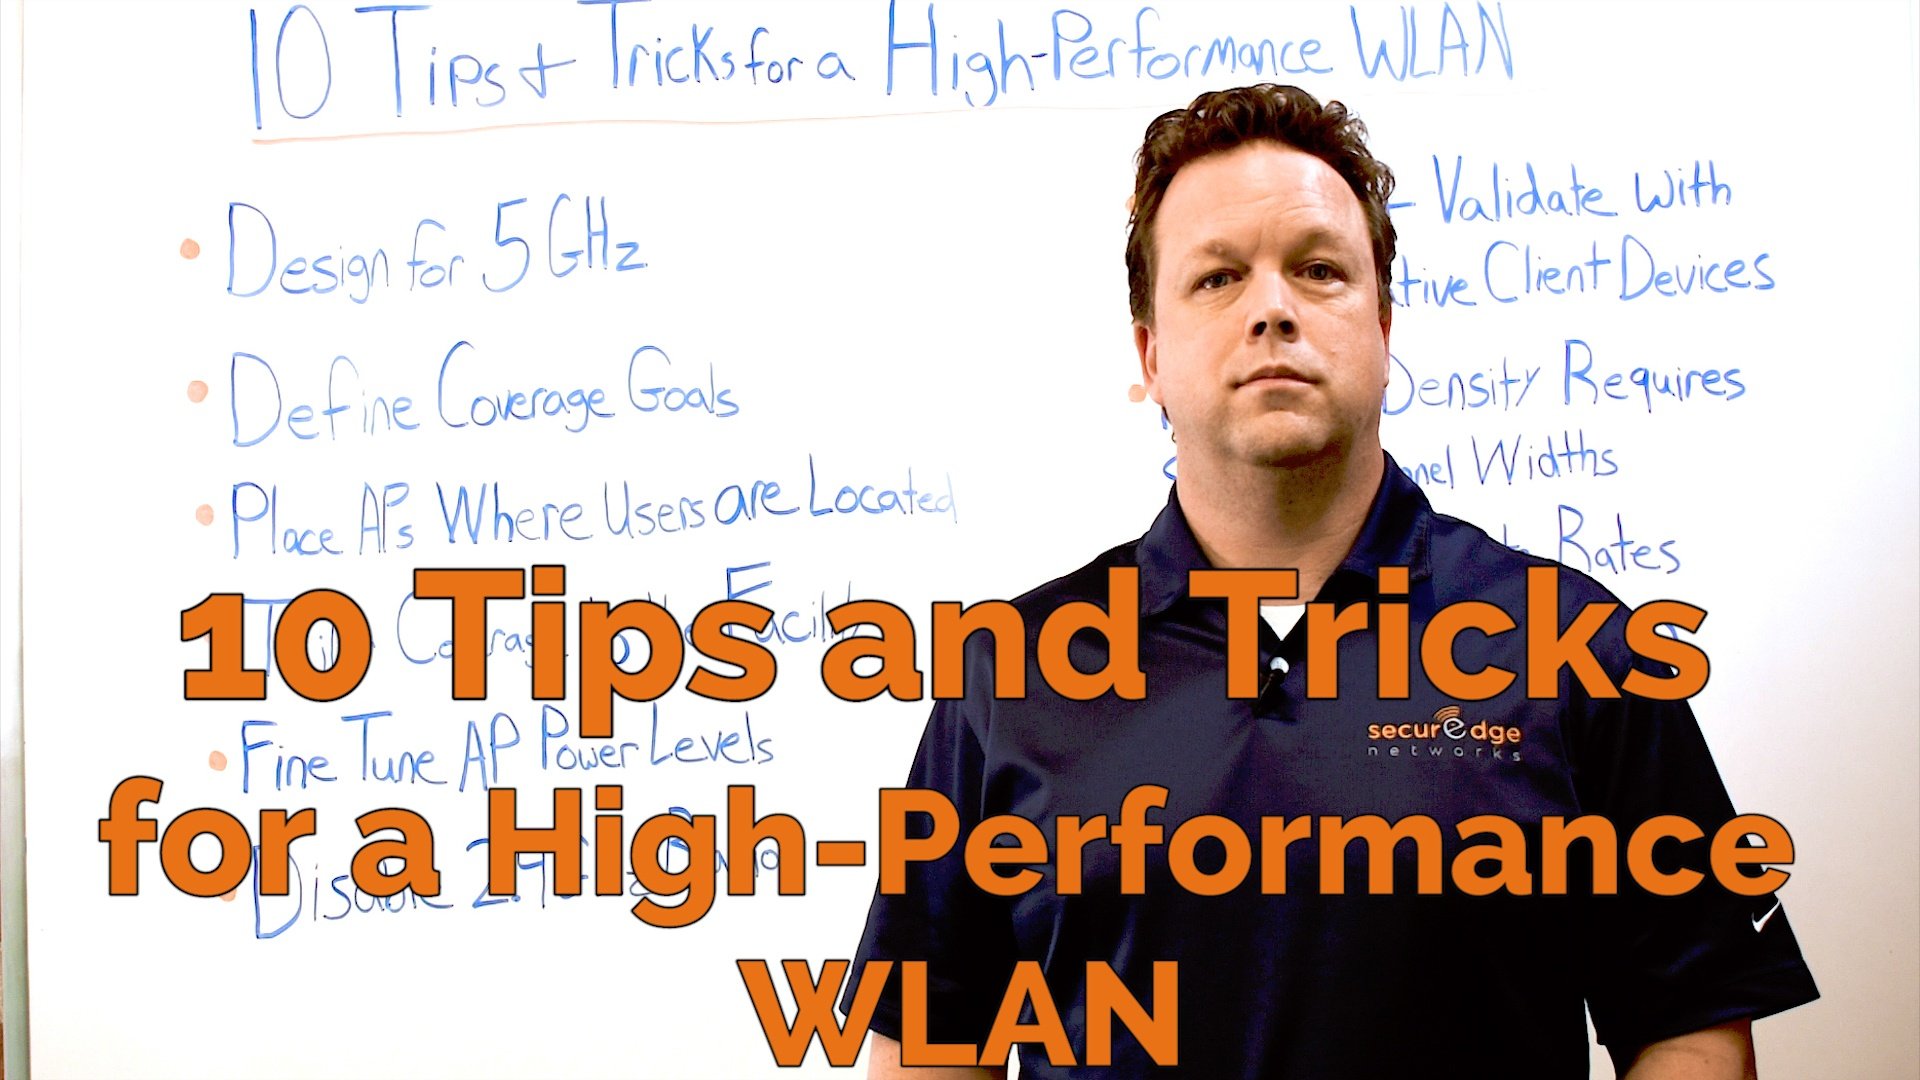 WiFi Network Design: 10 Tips and Tricks for a High-Performance WLAN